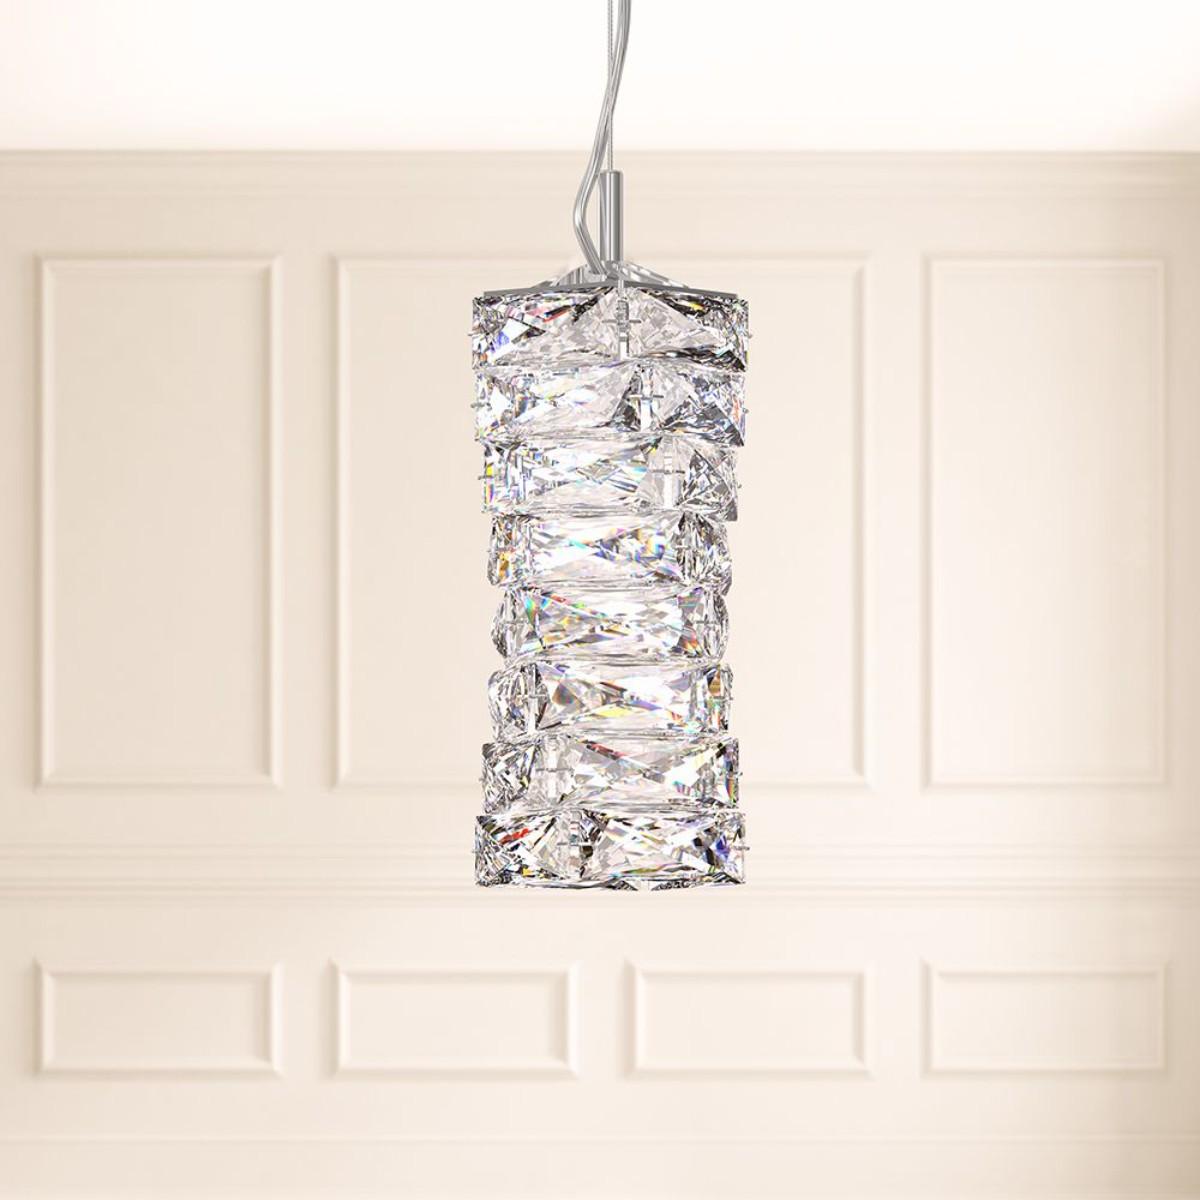 Glissando LED 5 inch Stainless Steel Pendant Light with Crystals from Swarovski